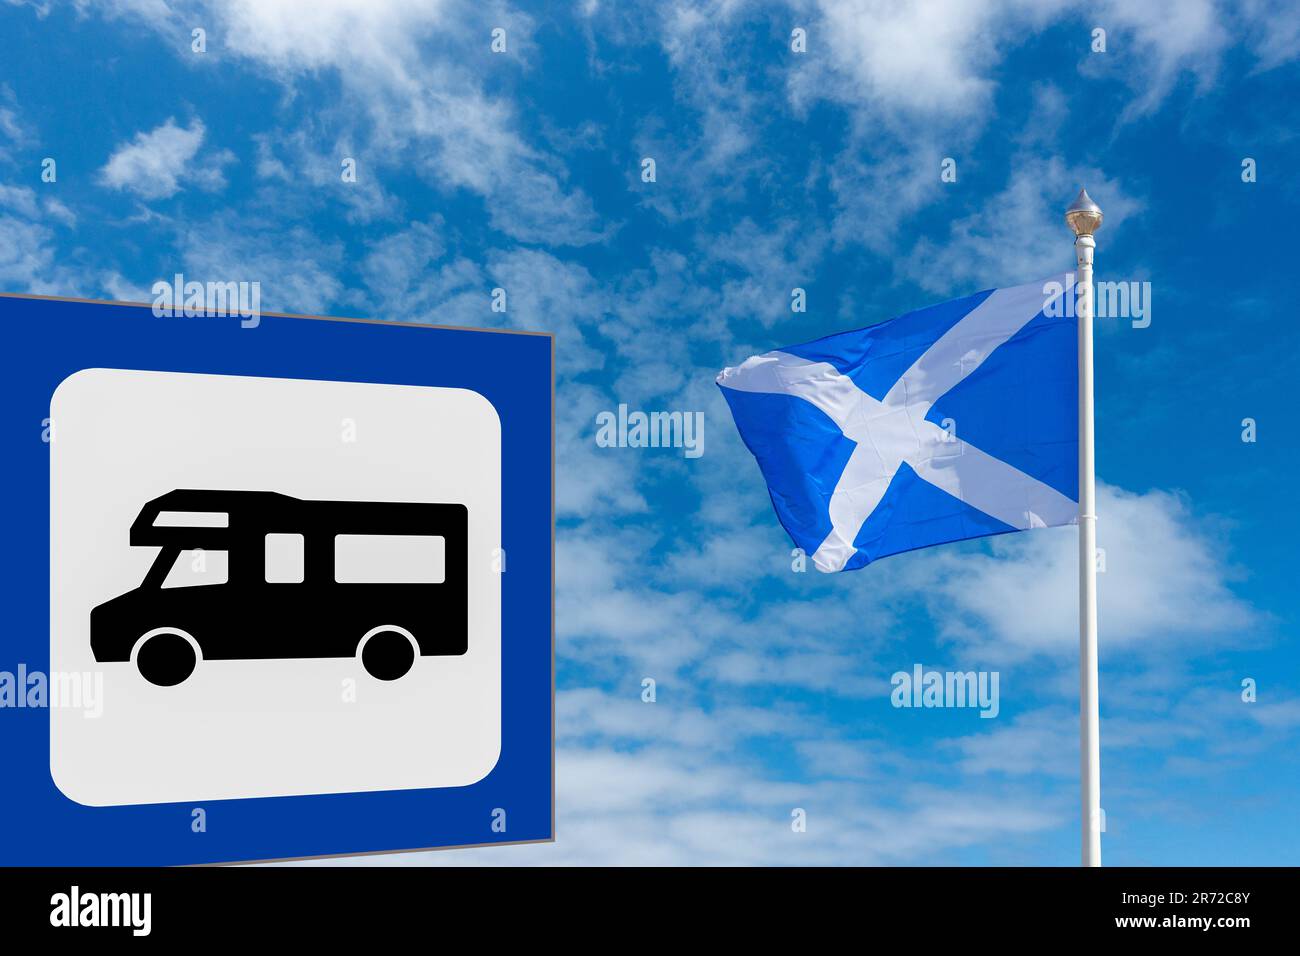 Flag of Scotland with motorhome sign. Police investigation, SNP funds, arrests...concept Stock Photo